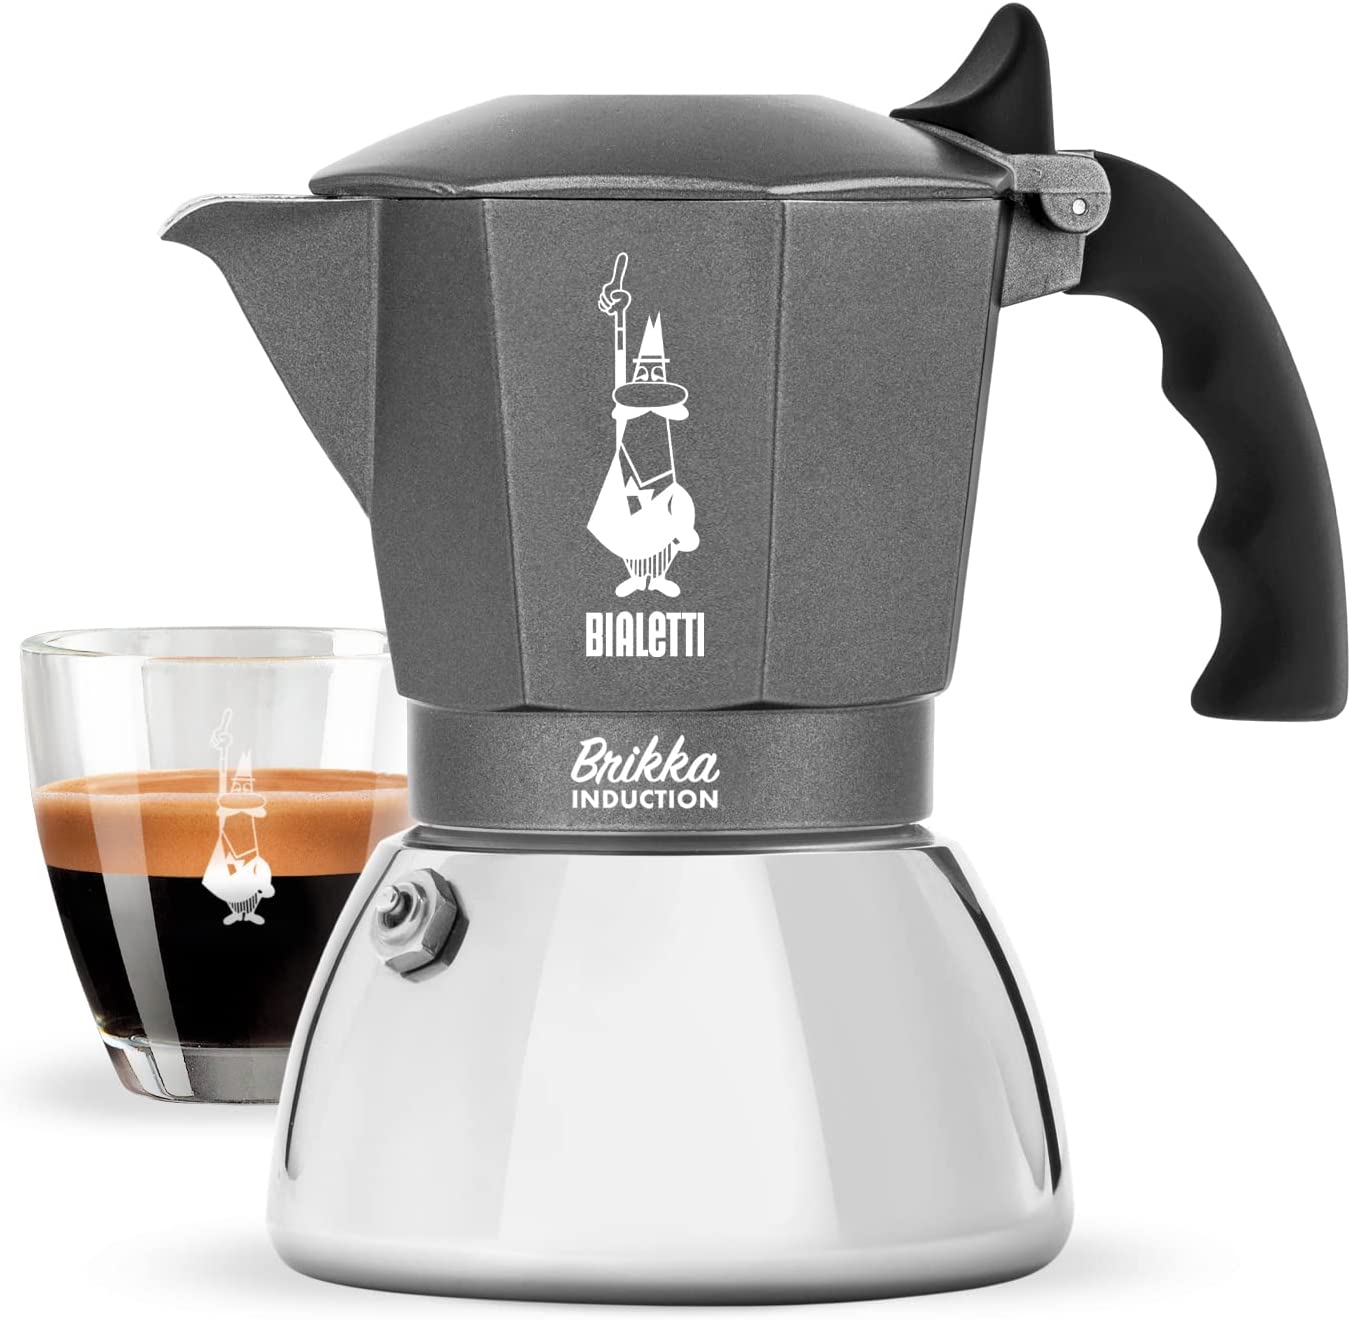 Bialetti Brikka Induction Coffee Maker, 4 Cups (160 ml), Bar Espresso Suitable for All Hob Types, Elegant Design